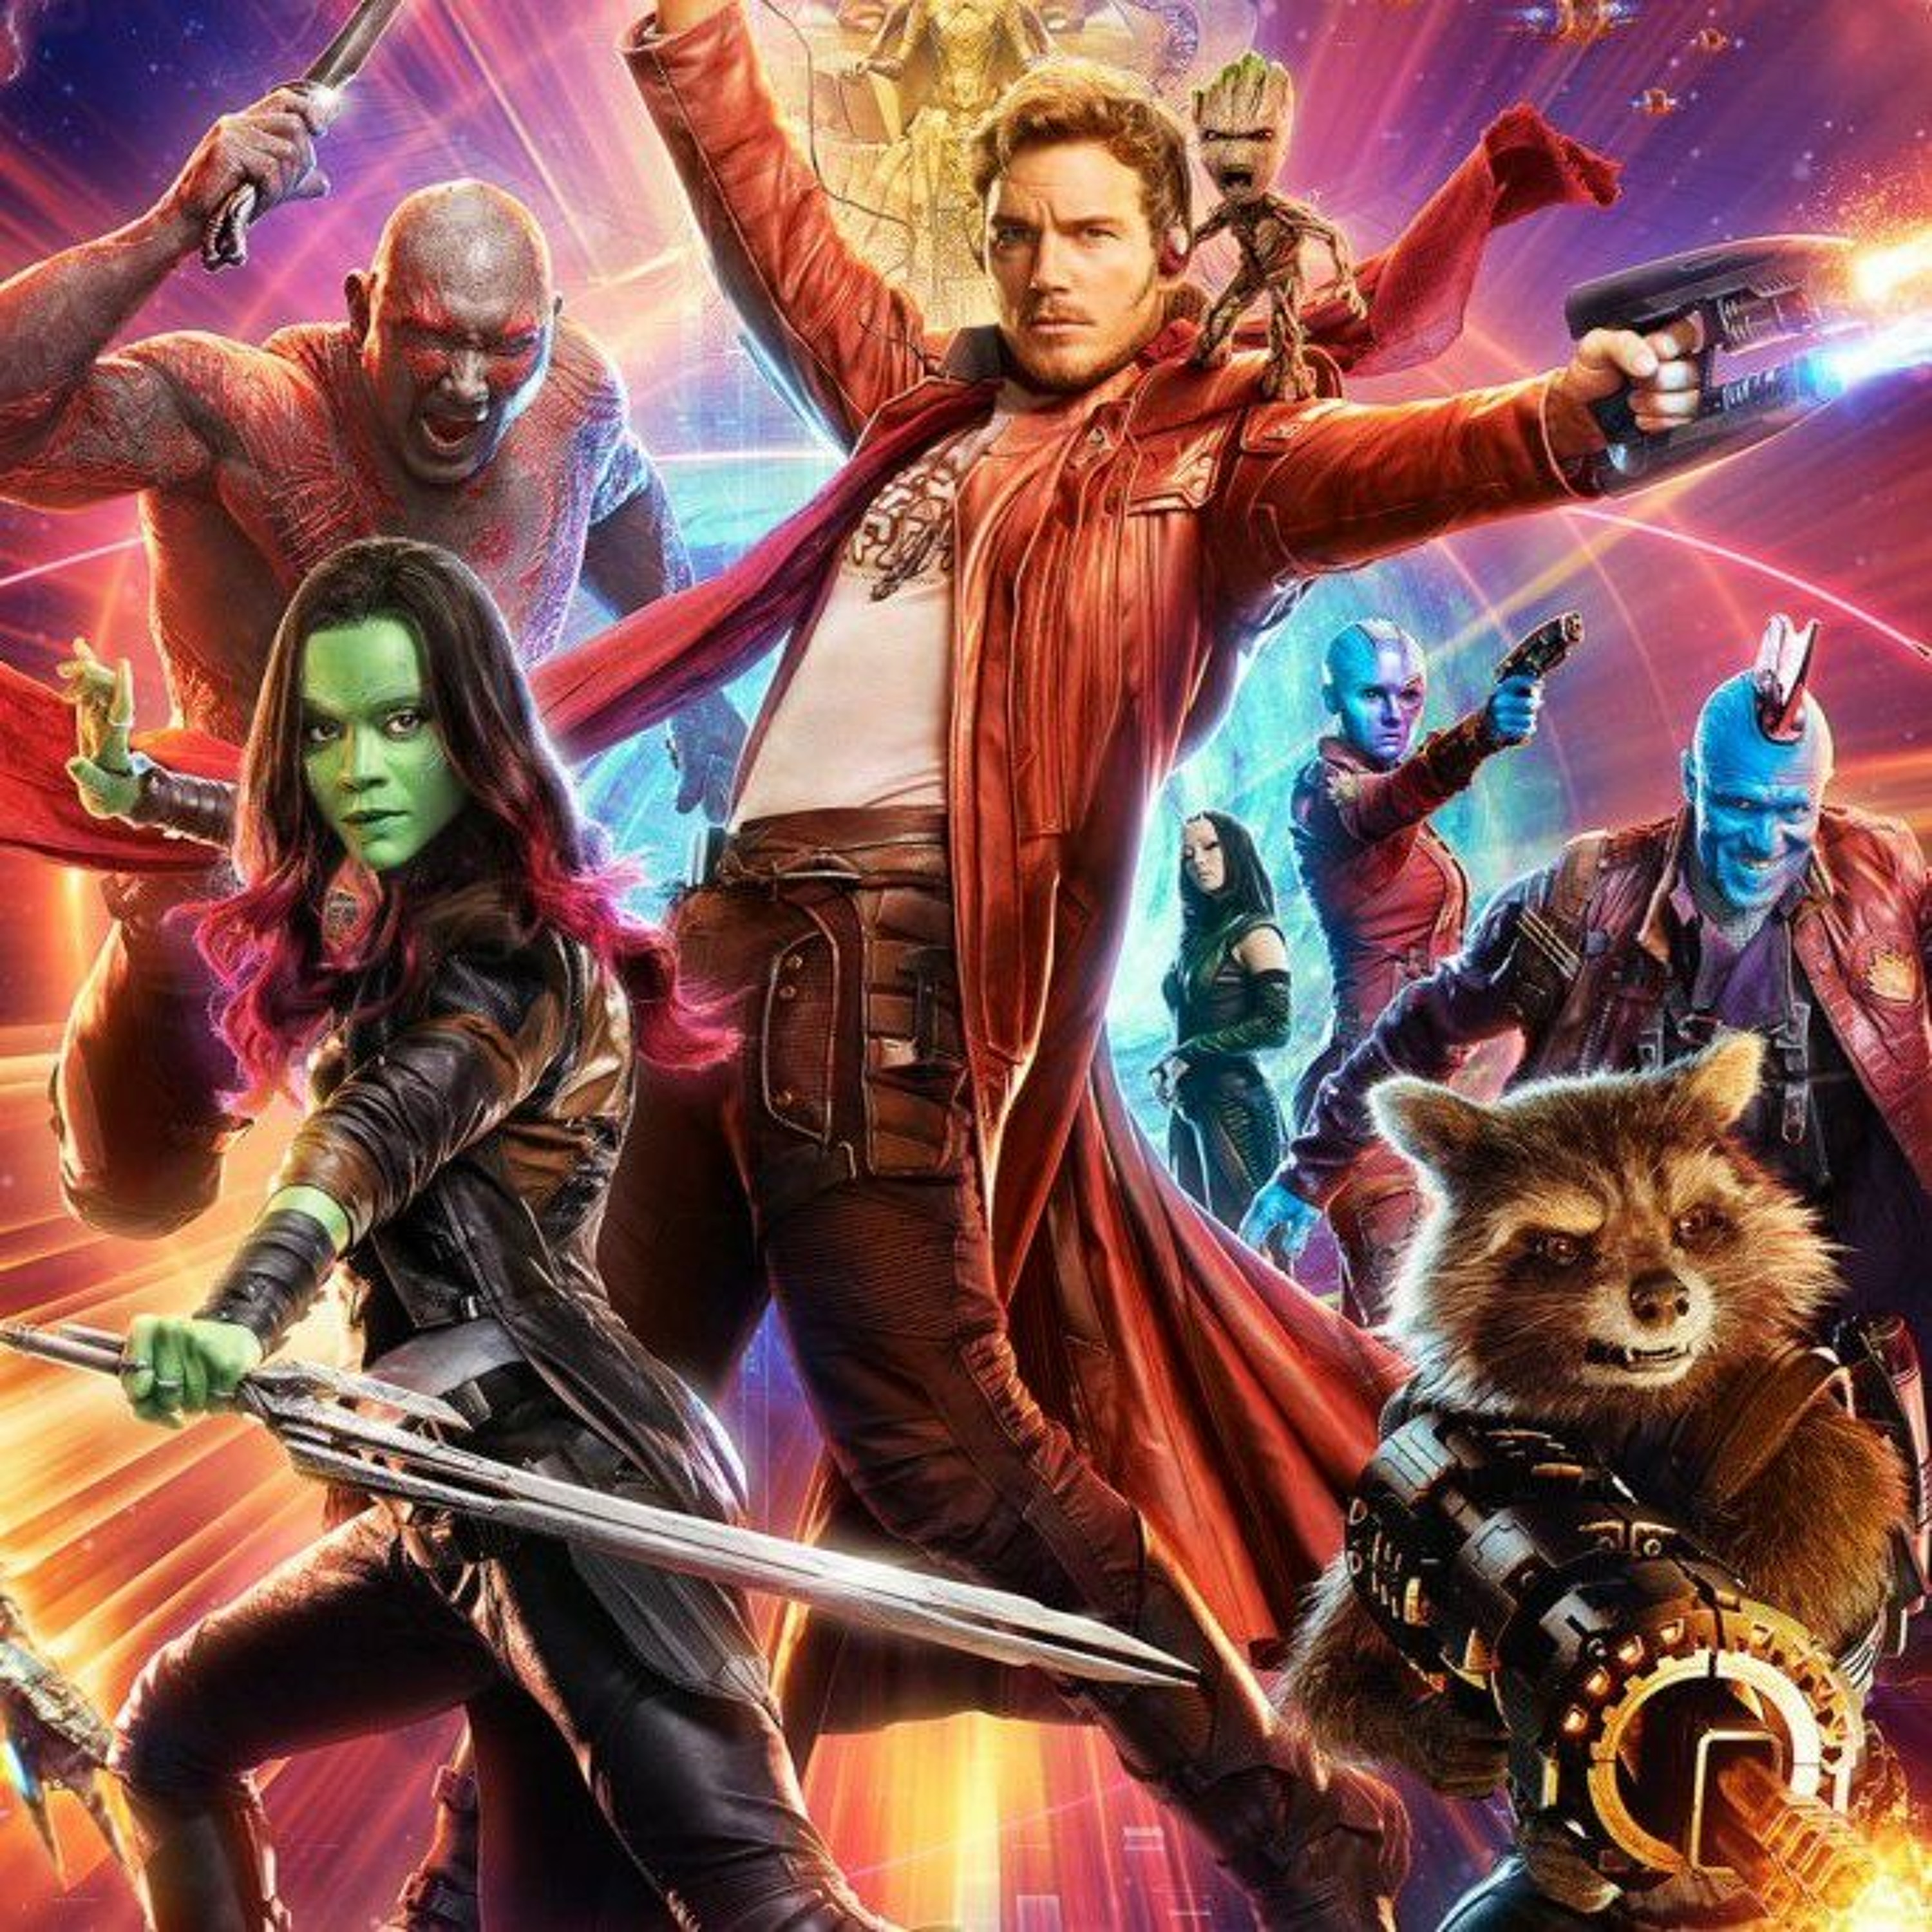 Guardians of the Galaxy 2- Daddy Issues, we all have them. Men's Psychology